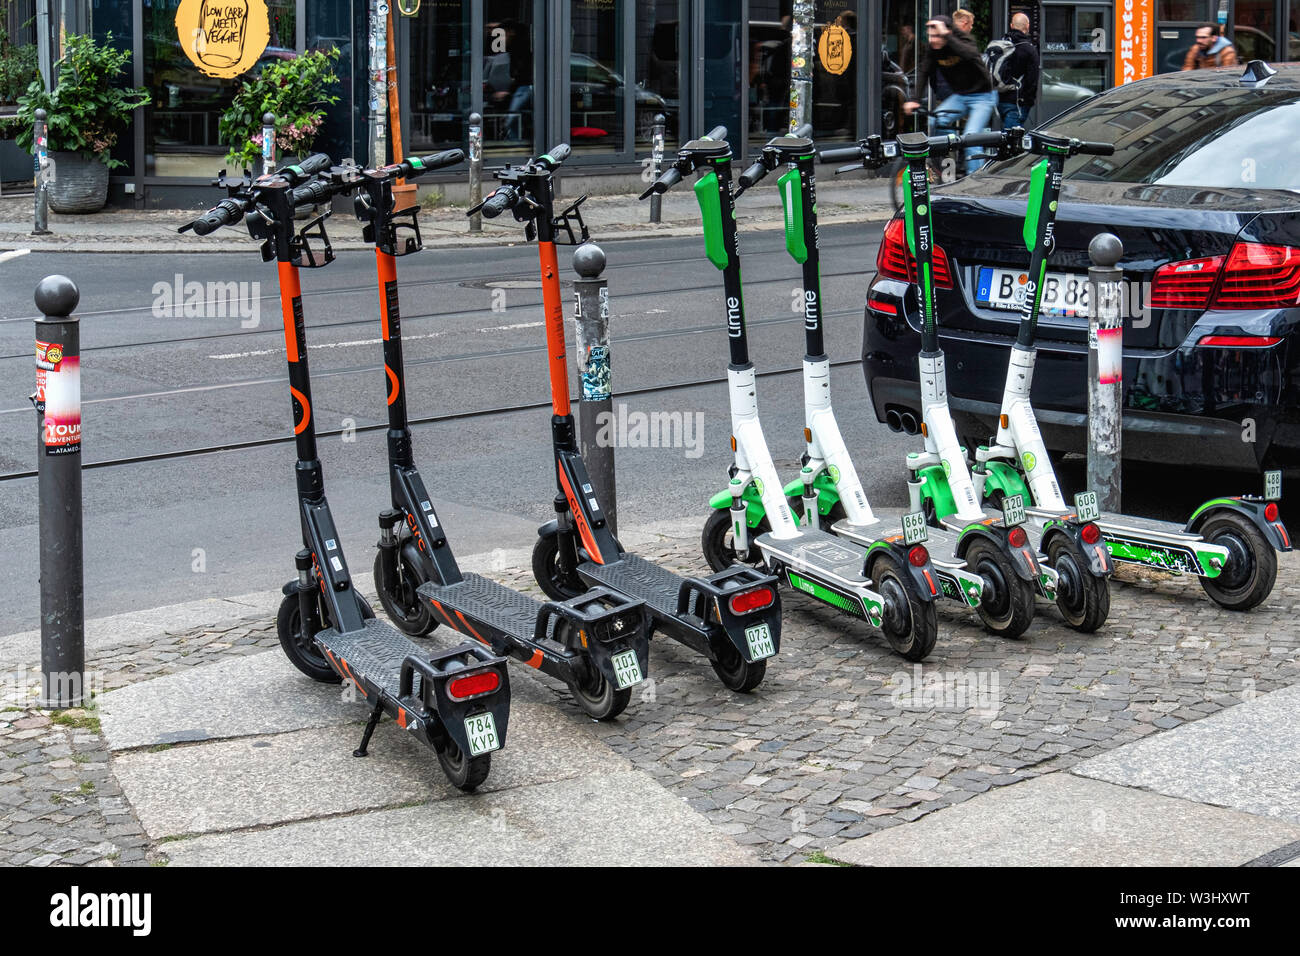 Circ & Lime e-scooters parked in a city street in Mitte-Berlin. The electric scooter is the latest form of transport in Germany.  E-scooters have recently been made legal for street use in Germany and are making an appearance in Berlin. Use is restricted to bike lanes & streets. The maximun speed allowed is 20kpm and under- fourteens are not permitted to use the scooters. Stock Photo